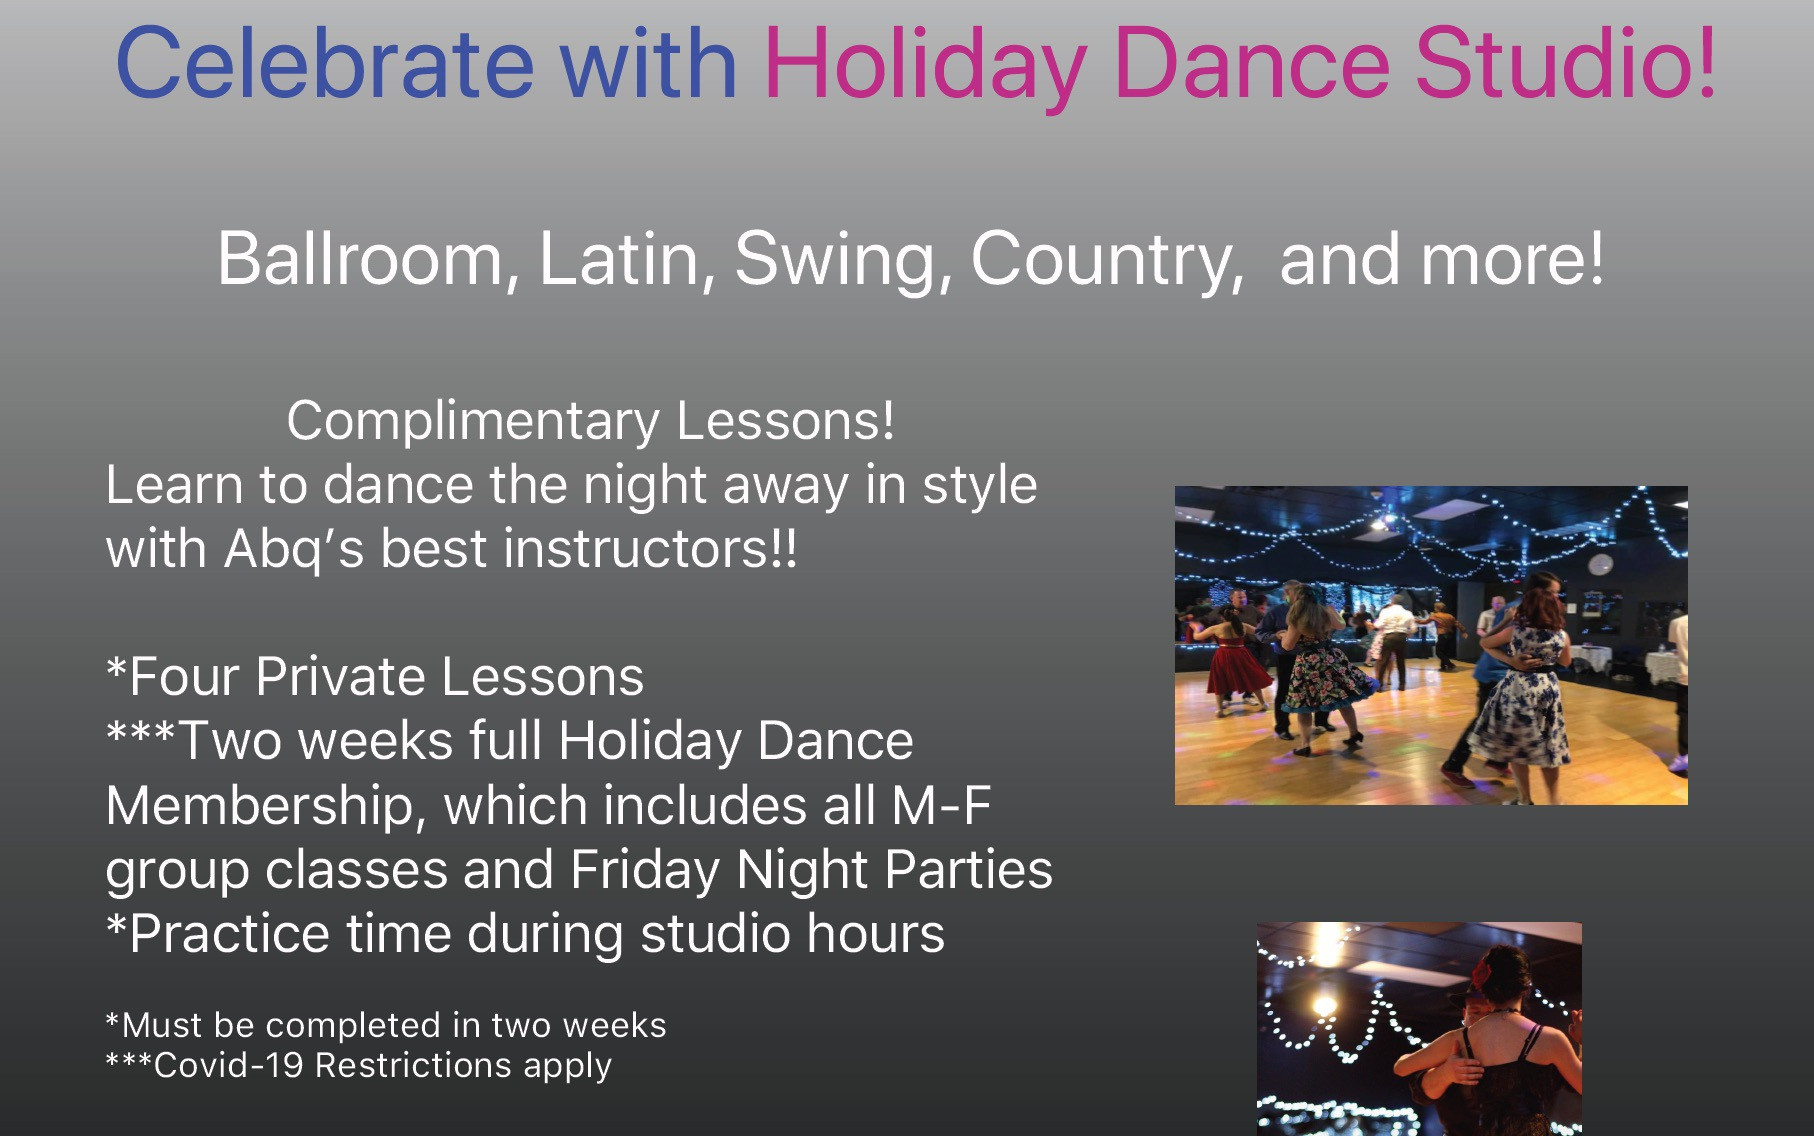 2 week, 4 private dance lessons at Holiday Dance Studio